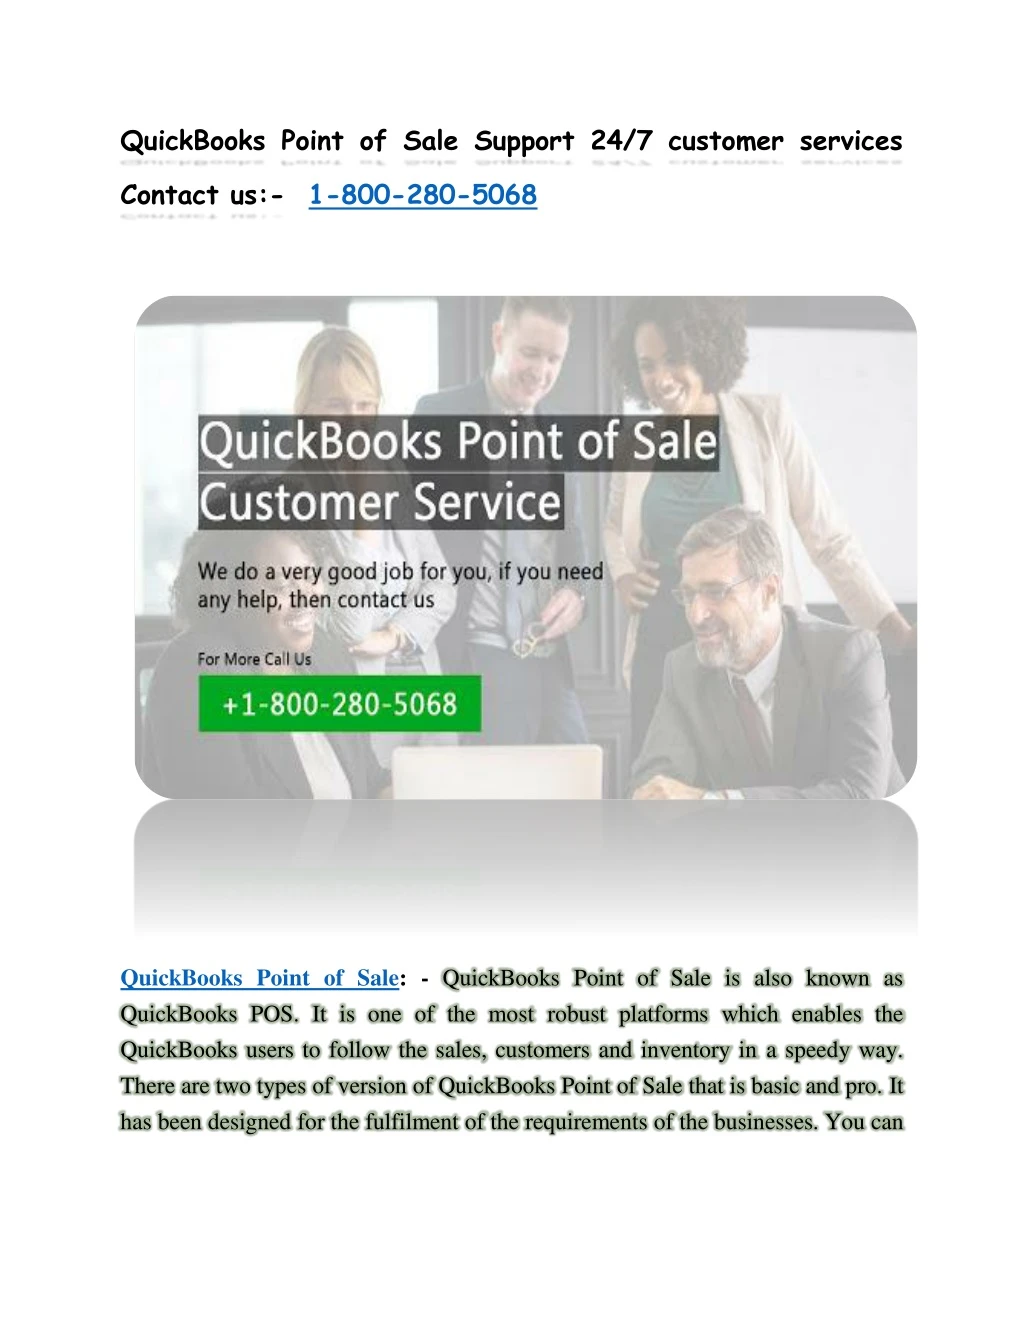 quickbooks point of sale support 24 7 customer